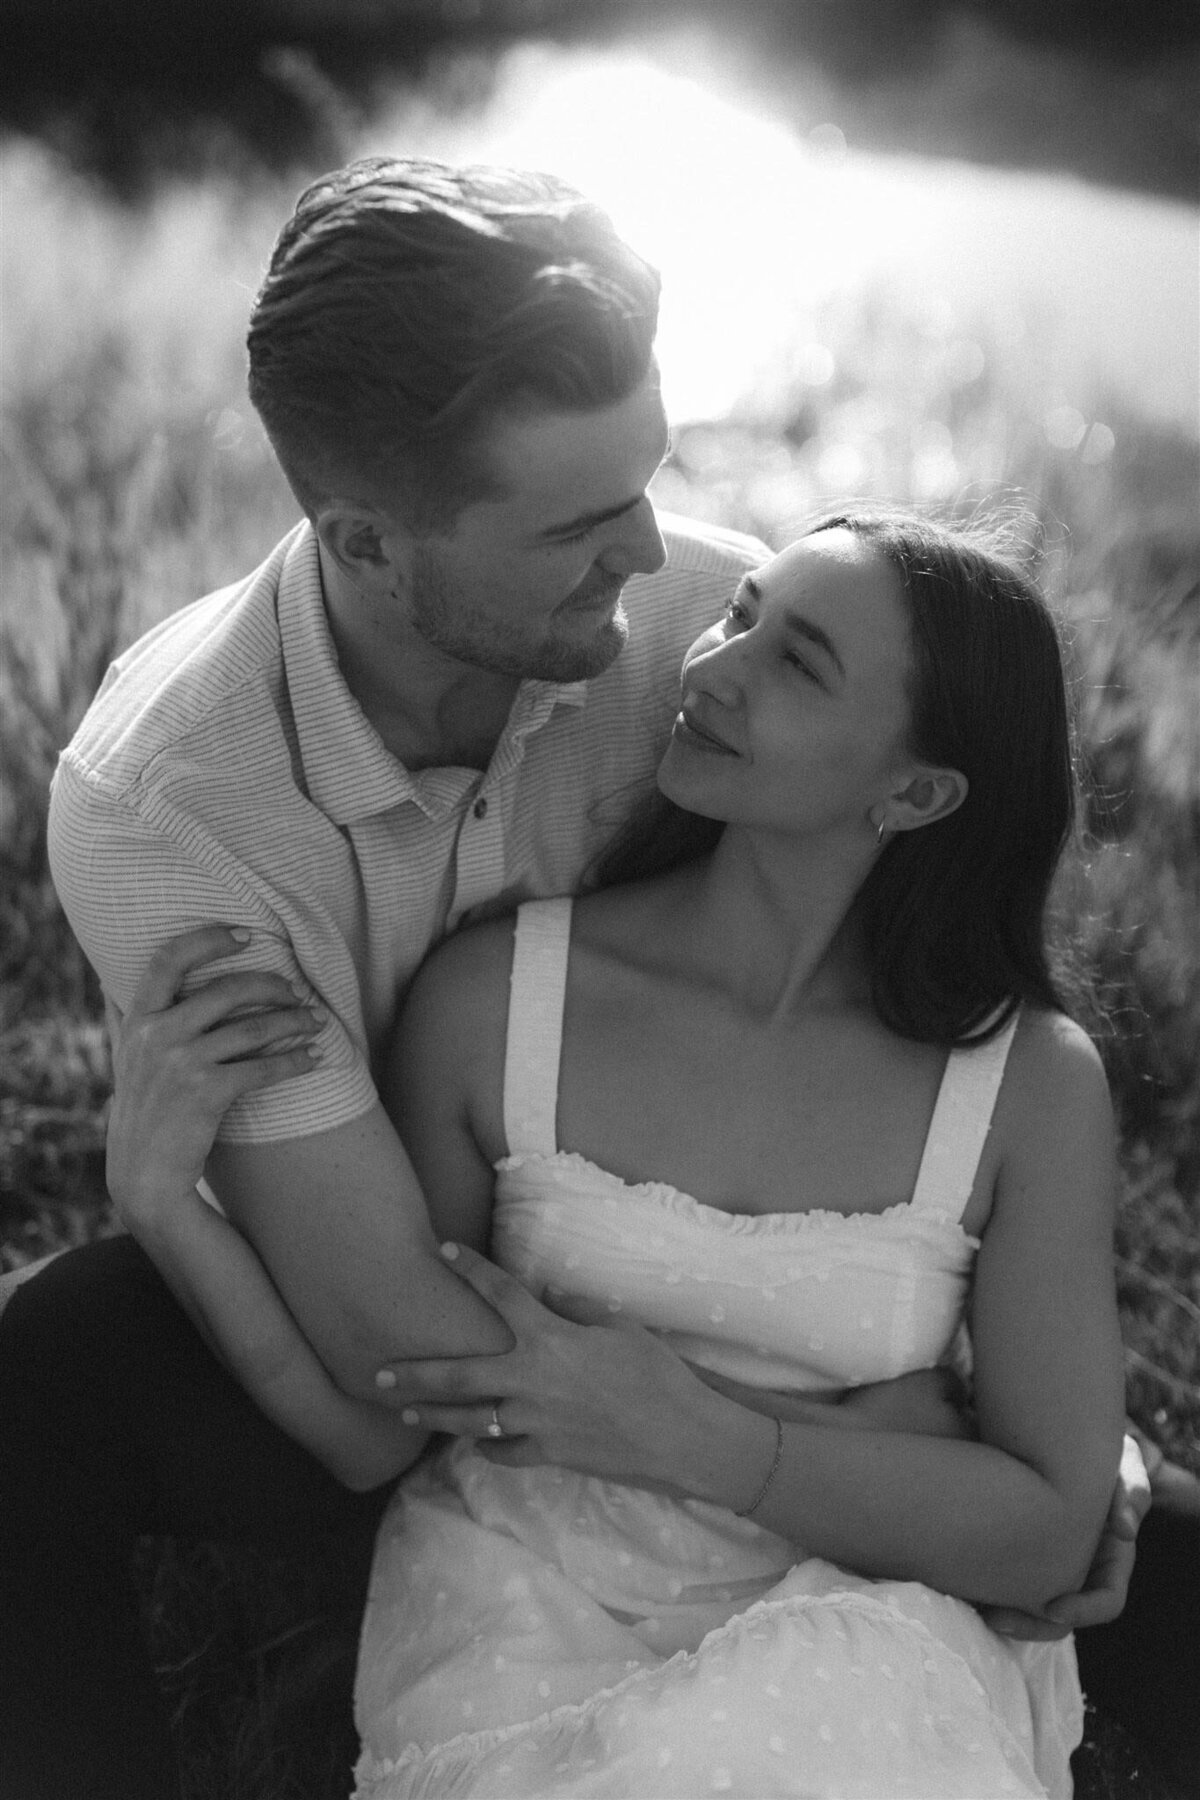 Gorgeous engagement portrait, captured by Bronte Taylor Photography, a Vancouver-based photographer with a playful, genuine and intimate approach.